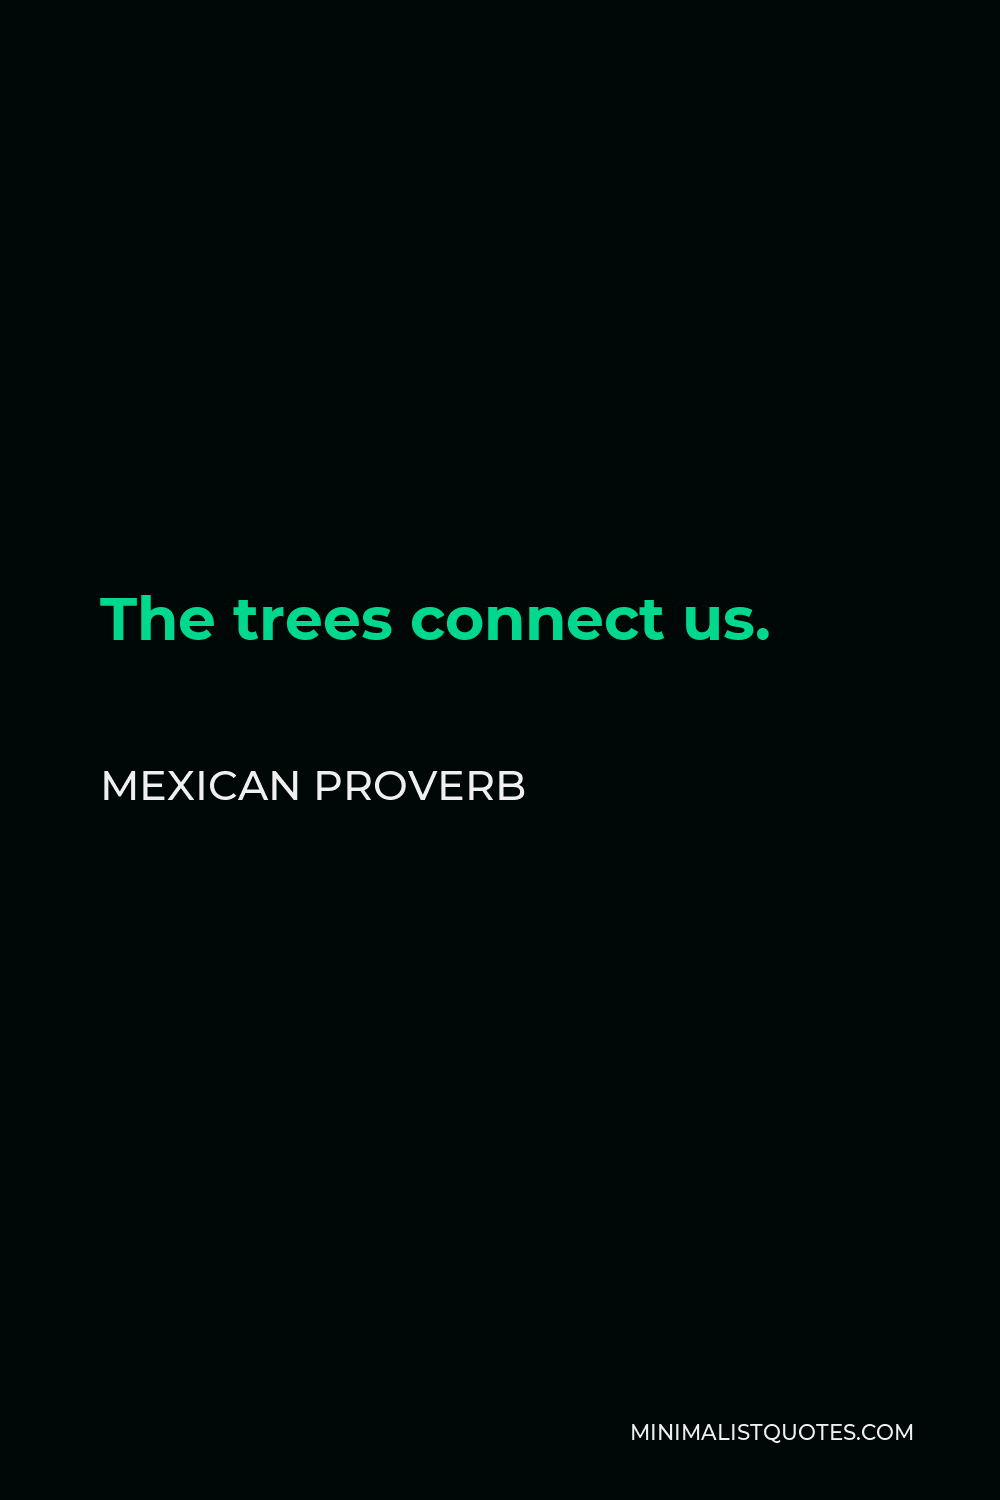 Mexican Proverb Quote - The trees connect us.